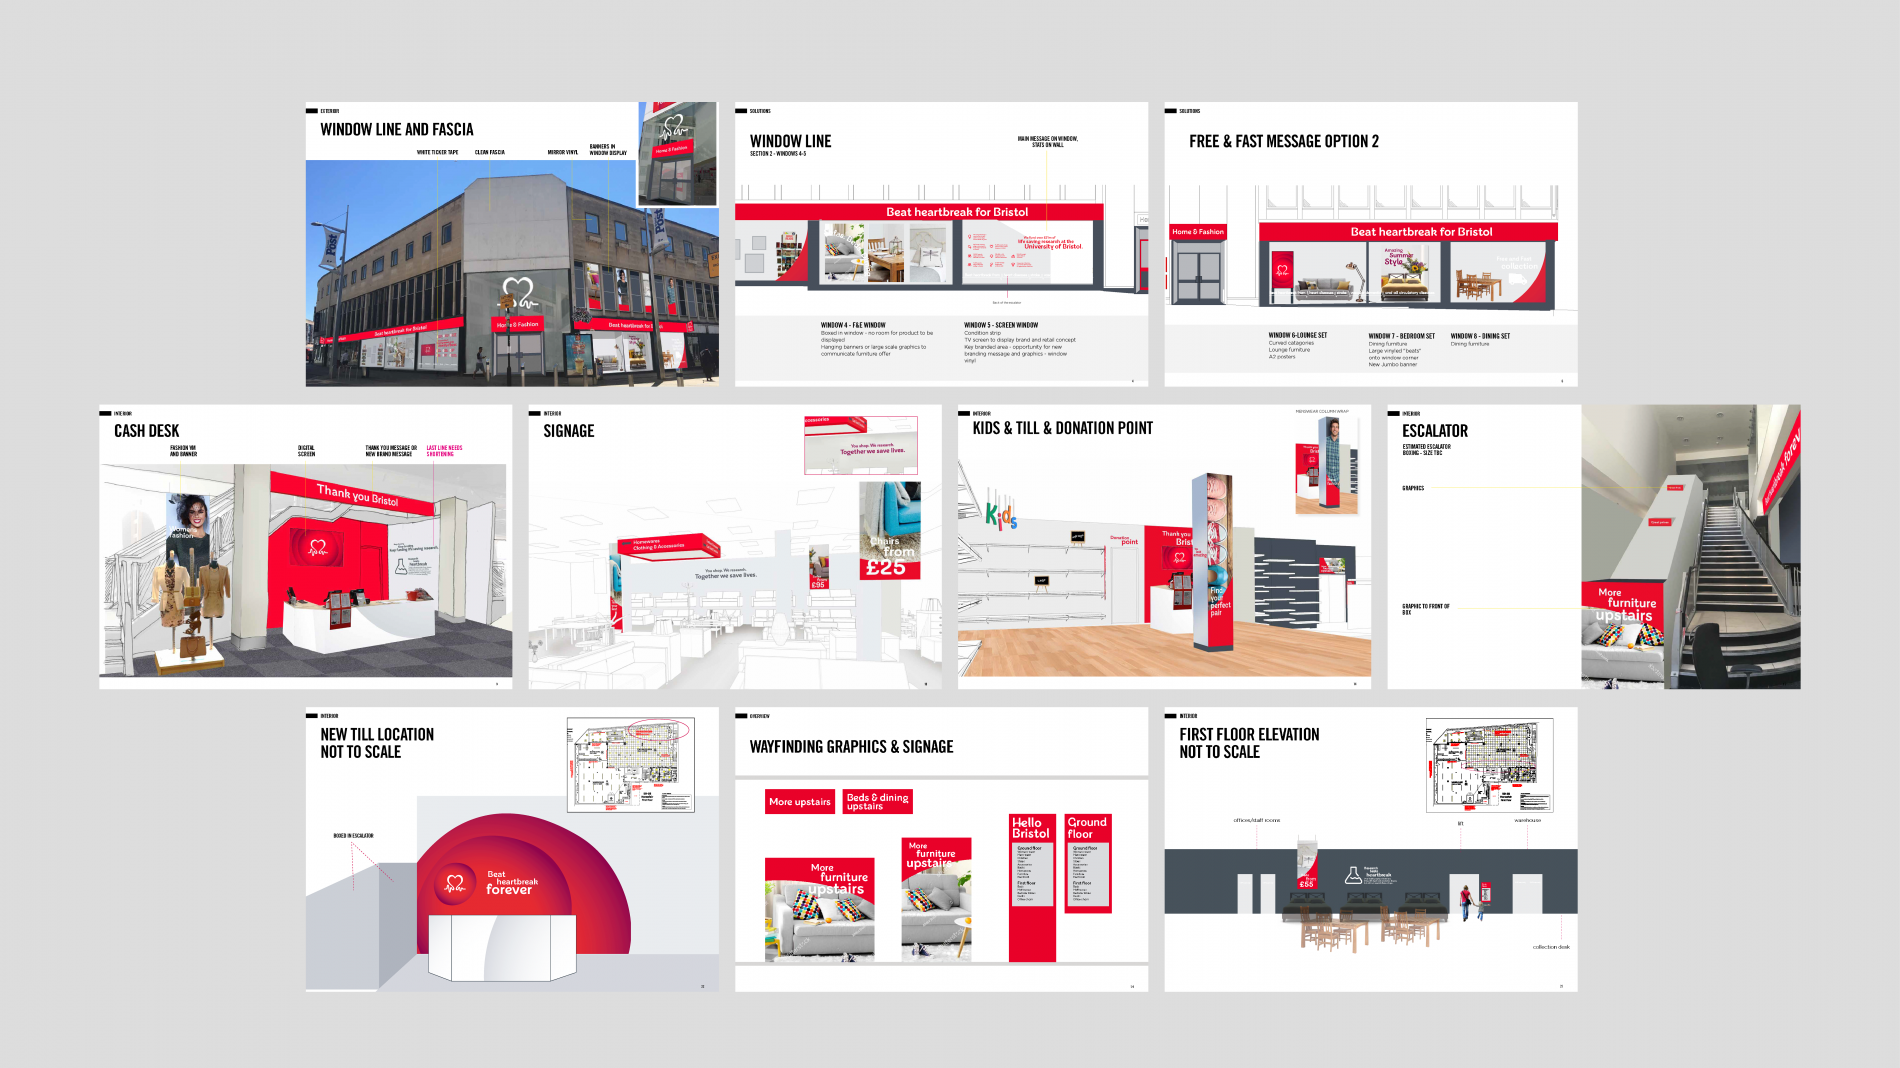 BHF furniture & electrical store planning